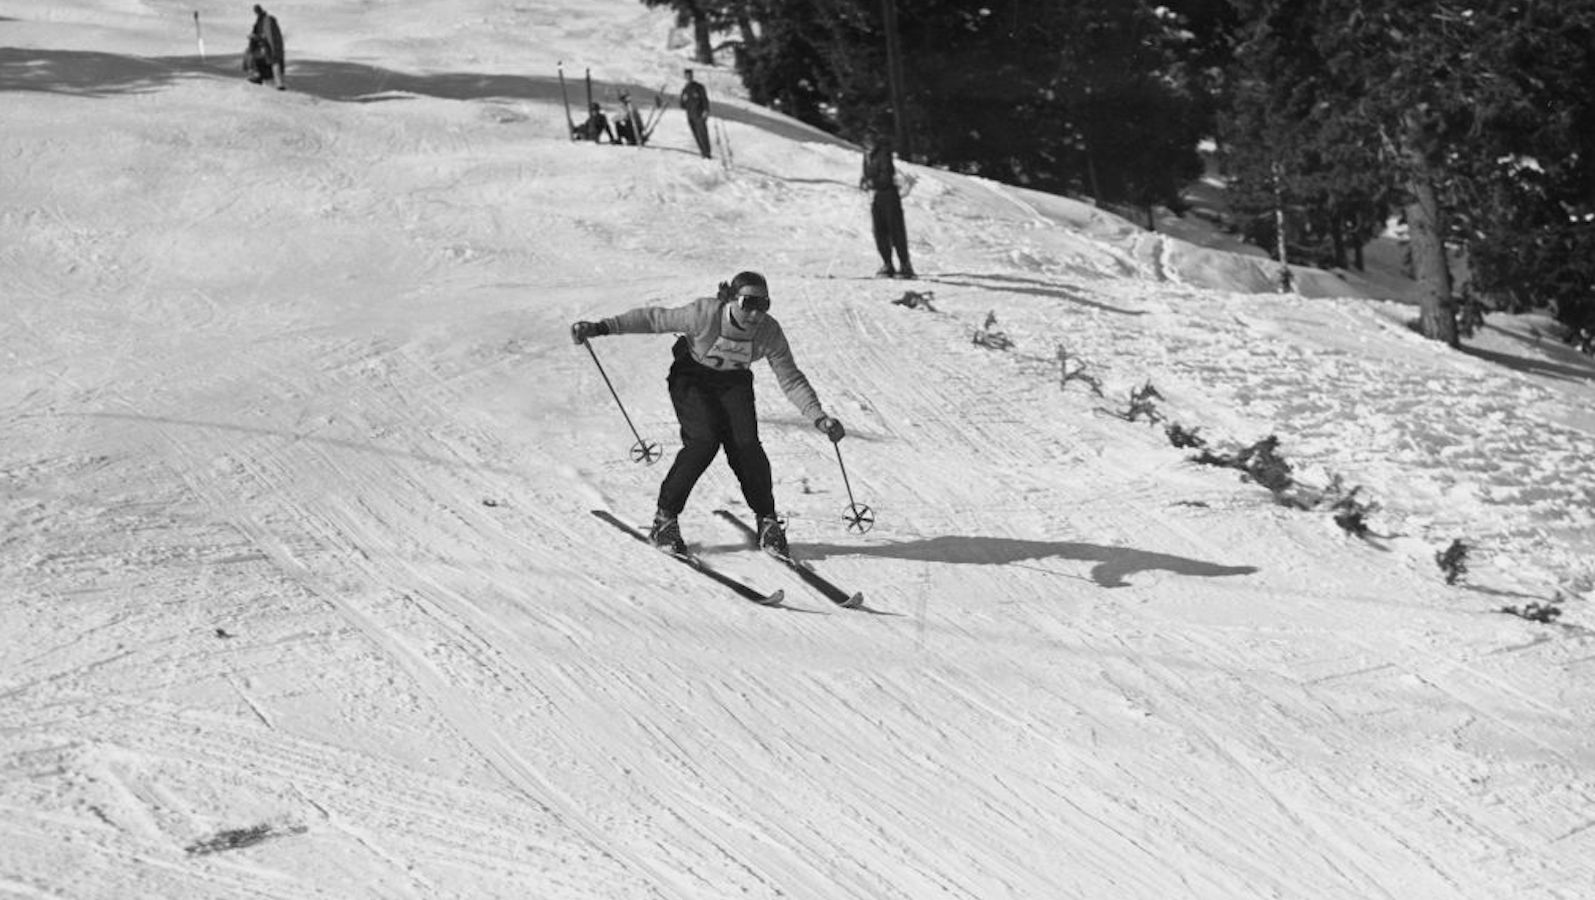 American alpine skier Madi Springer-Miller races against the clock on the slopes of Bald Mountain, Sun Valley, Idaho, 28th November 1951. Springer-Miller is training with other hopefuls for the United States Olympic ski team ahead of the 1952 Winter Olympics in Oslo, Norway.